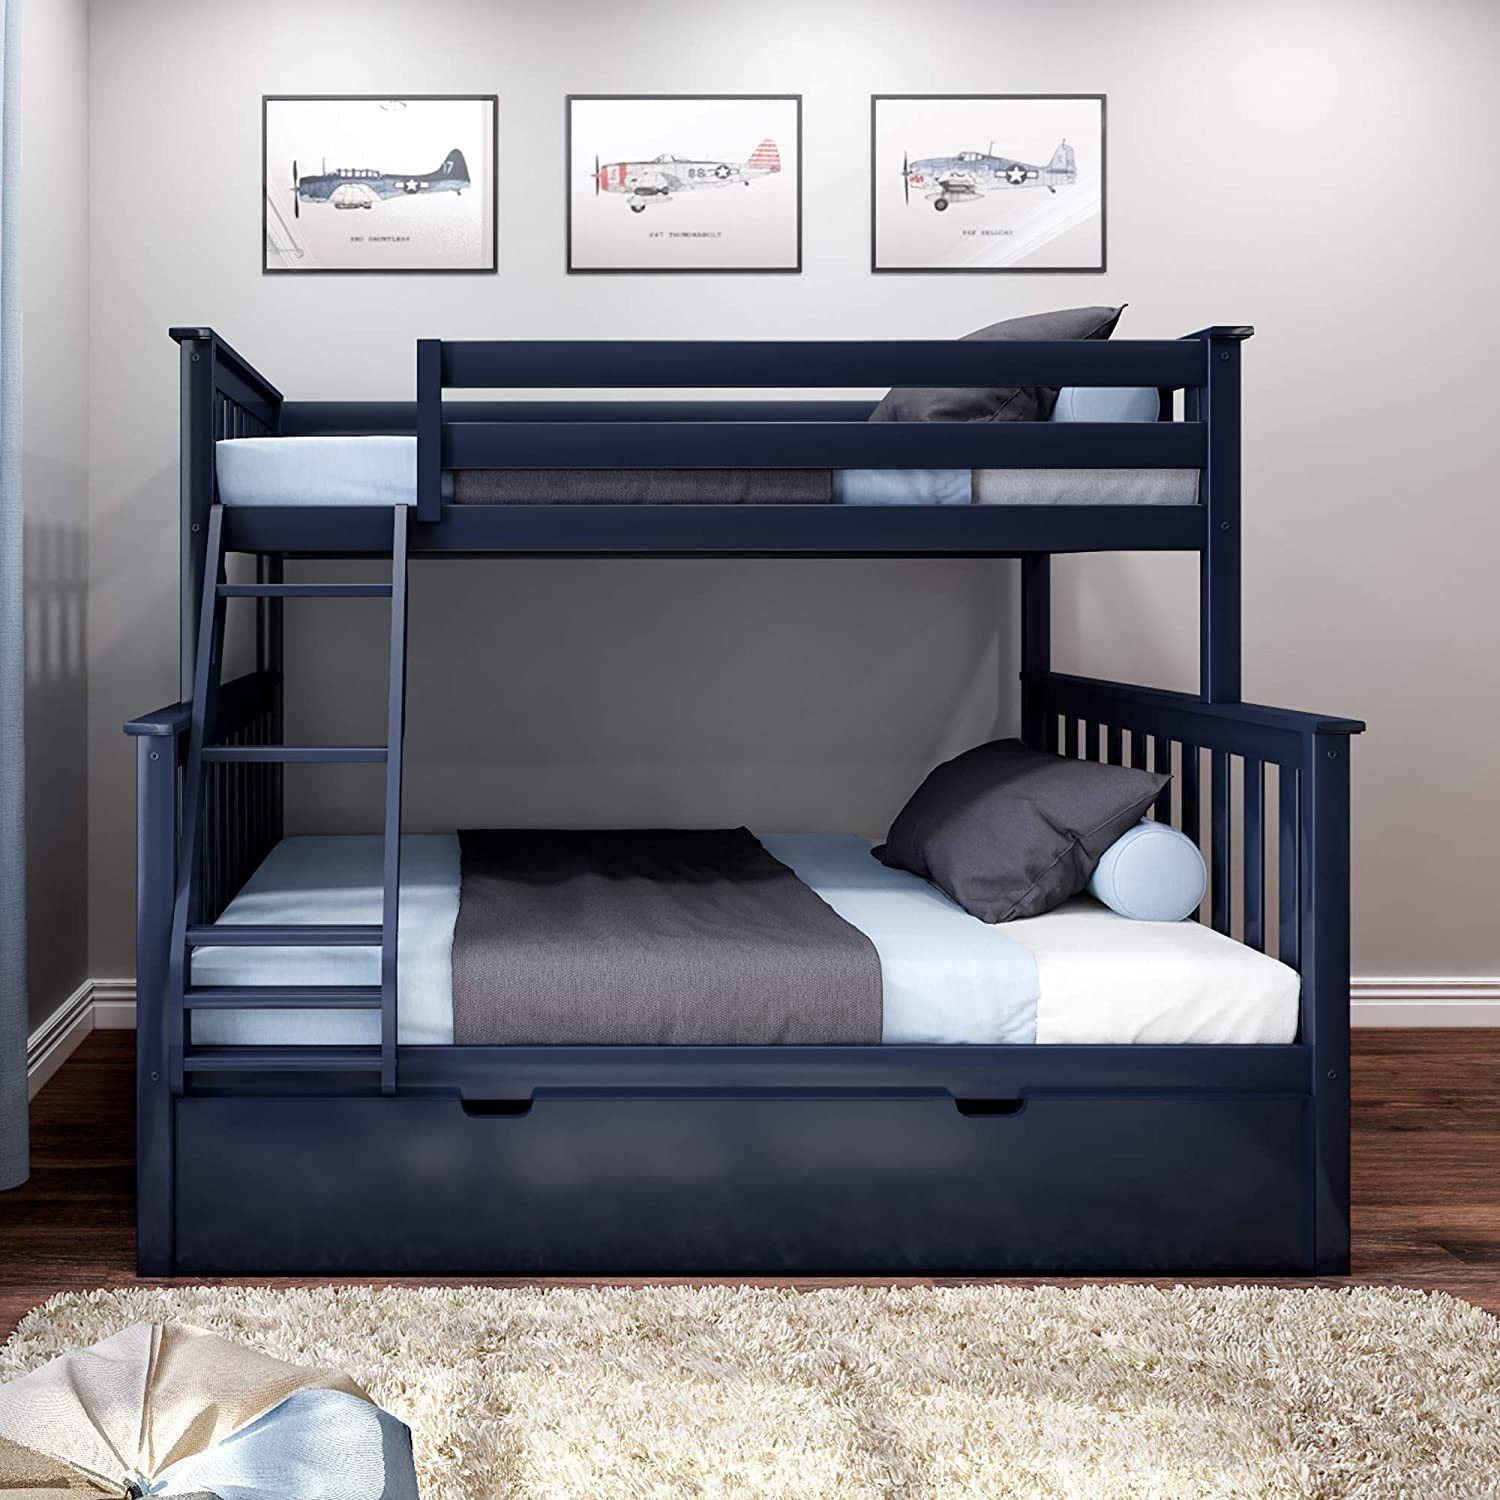 SOLID WOOD TWIN OVER FULL BUNK BED IN ESPRESSO WITH TRUNDLE BED